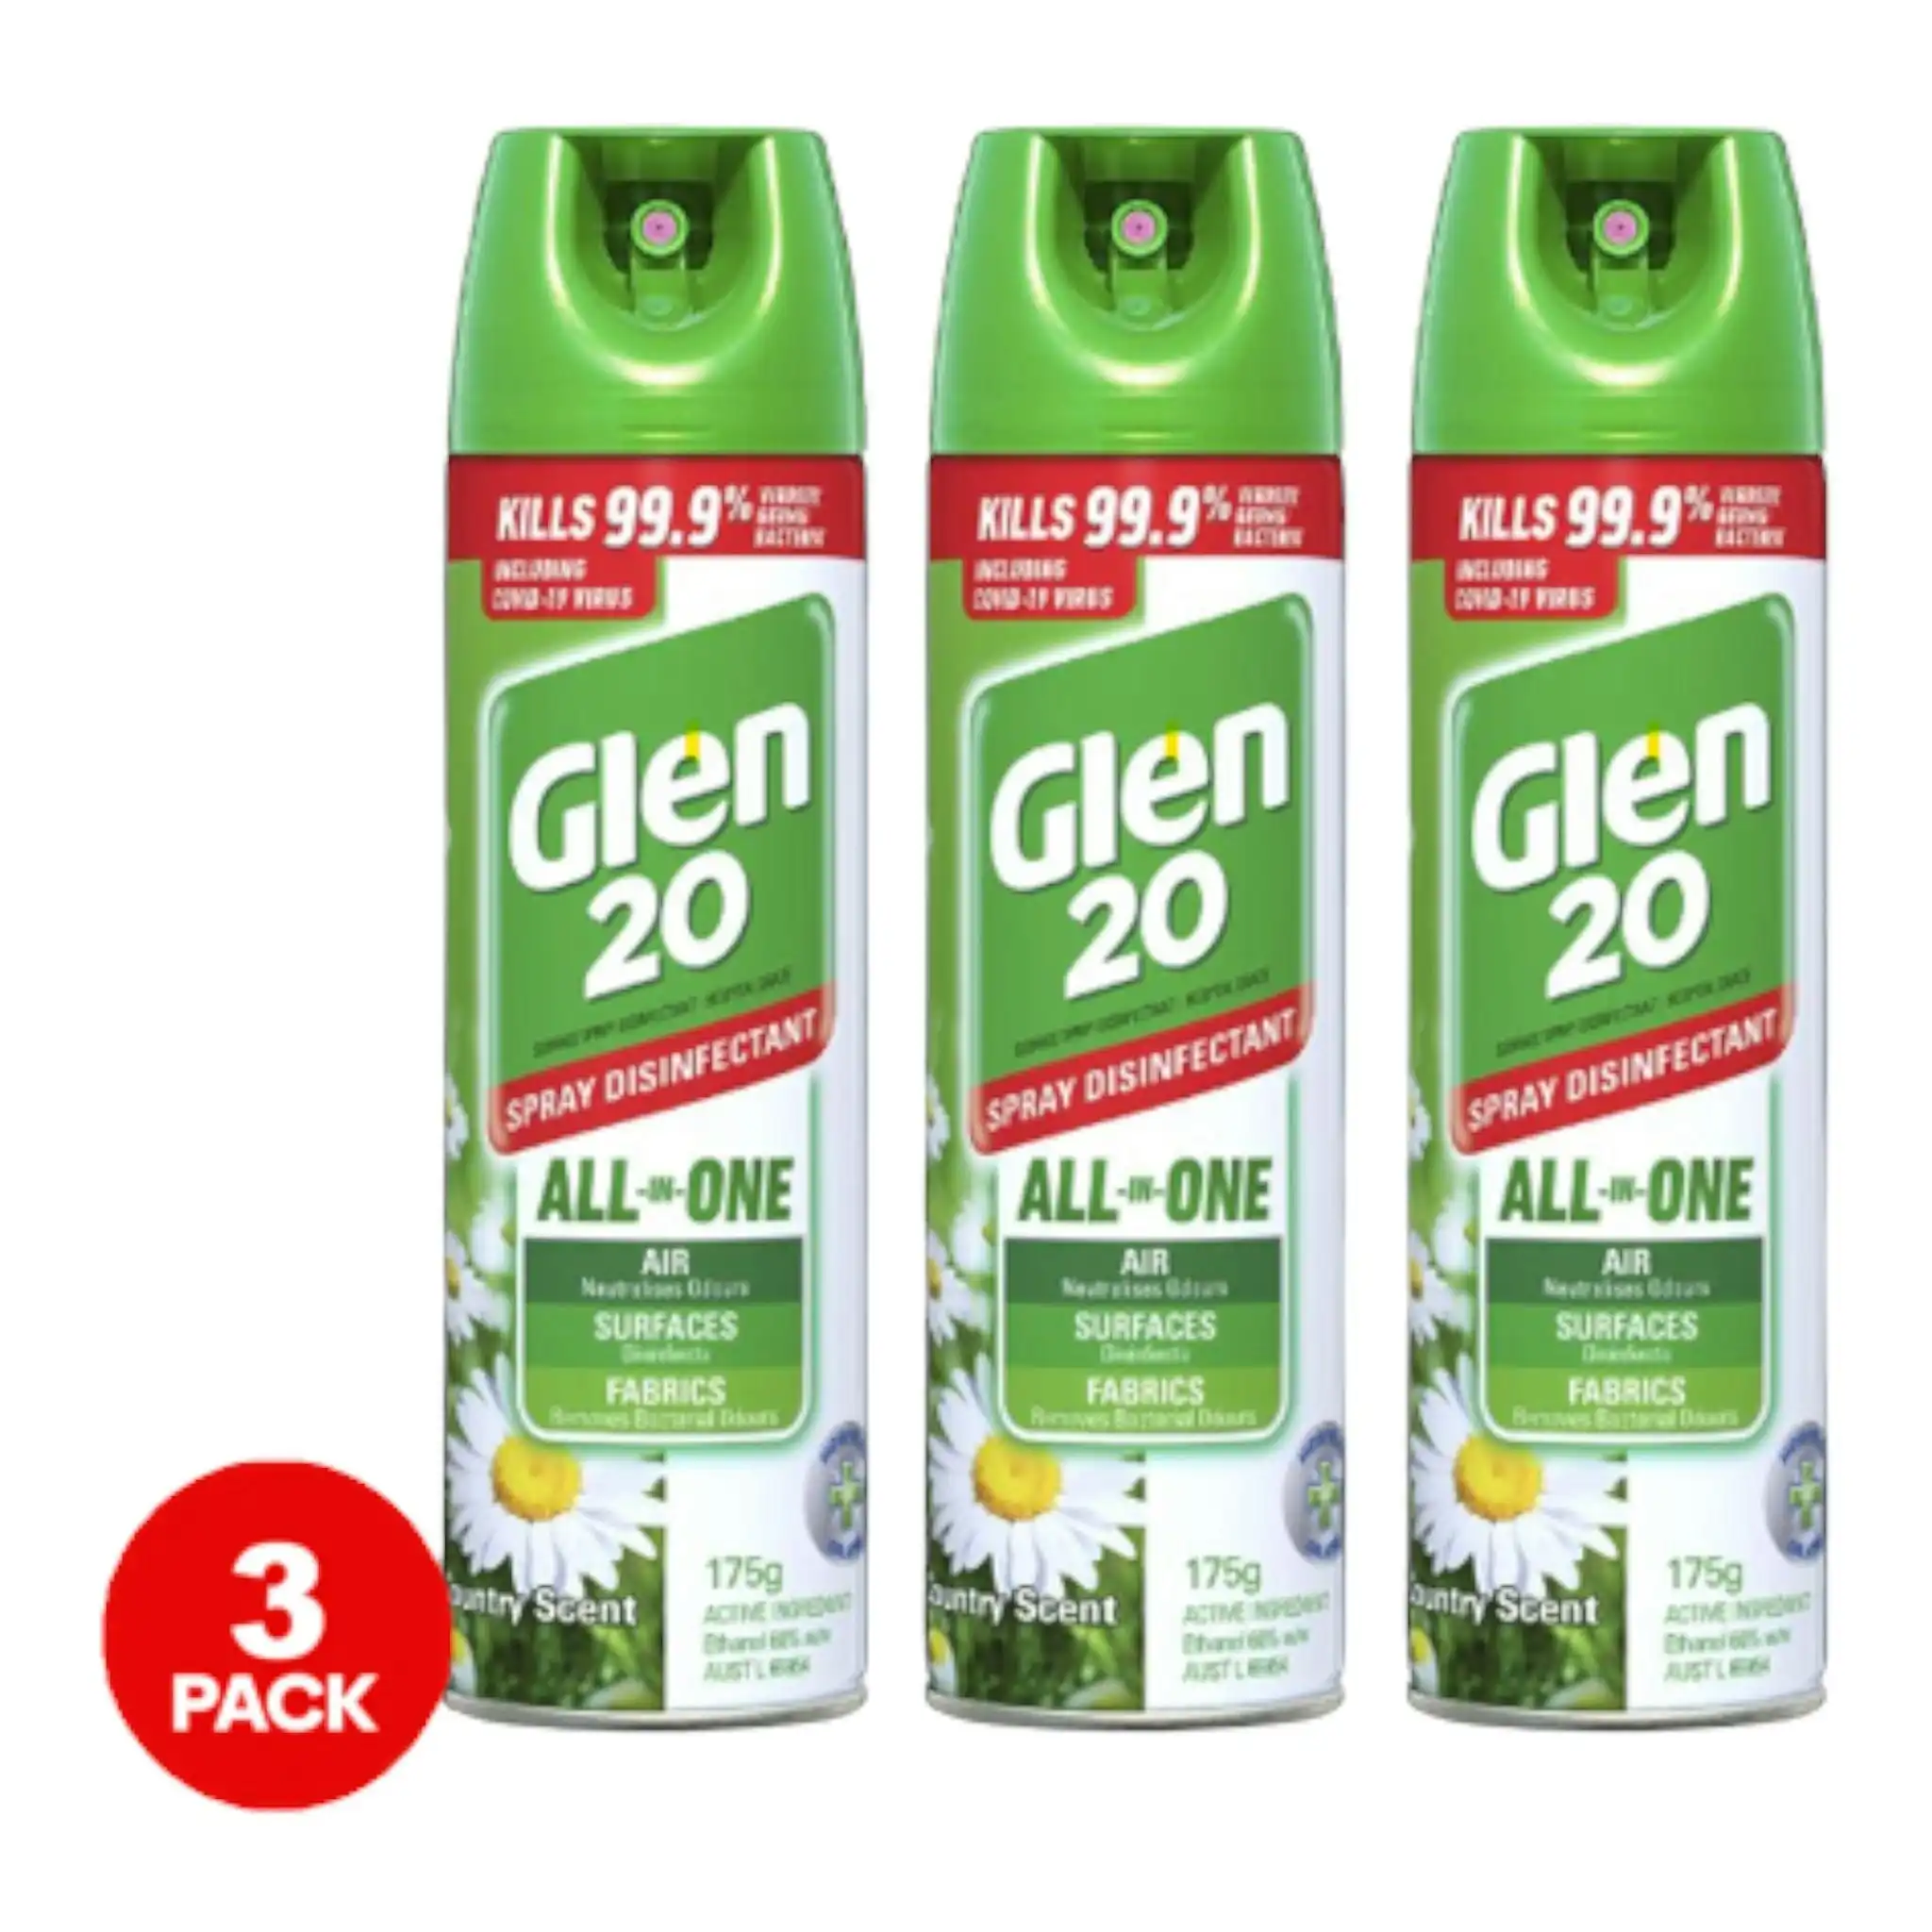 3 Pack Glen 20 Spray Disinfectant Country Scent 175g